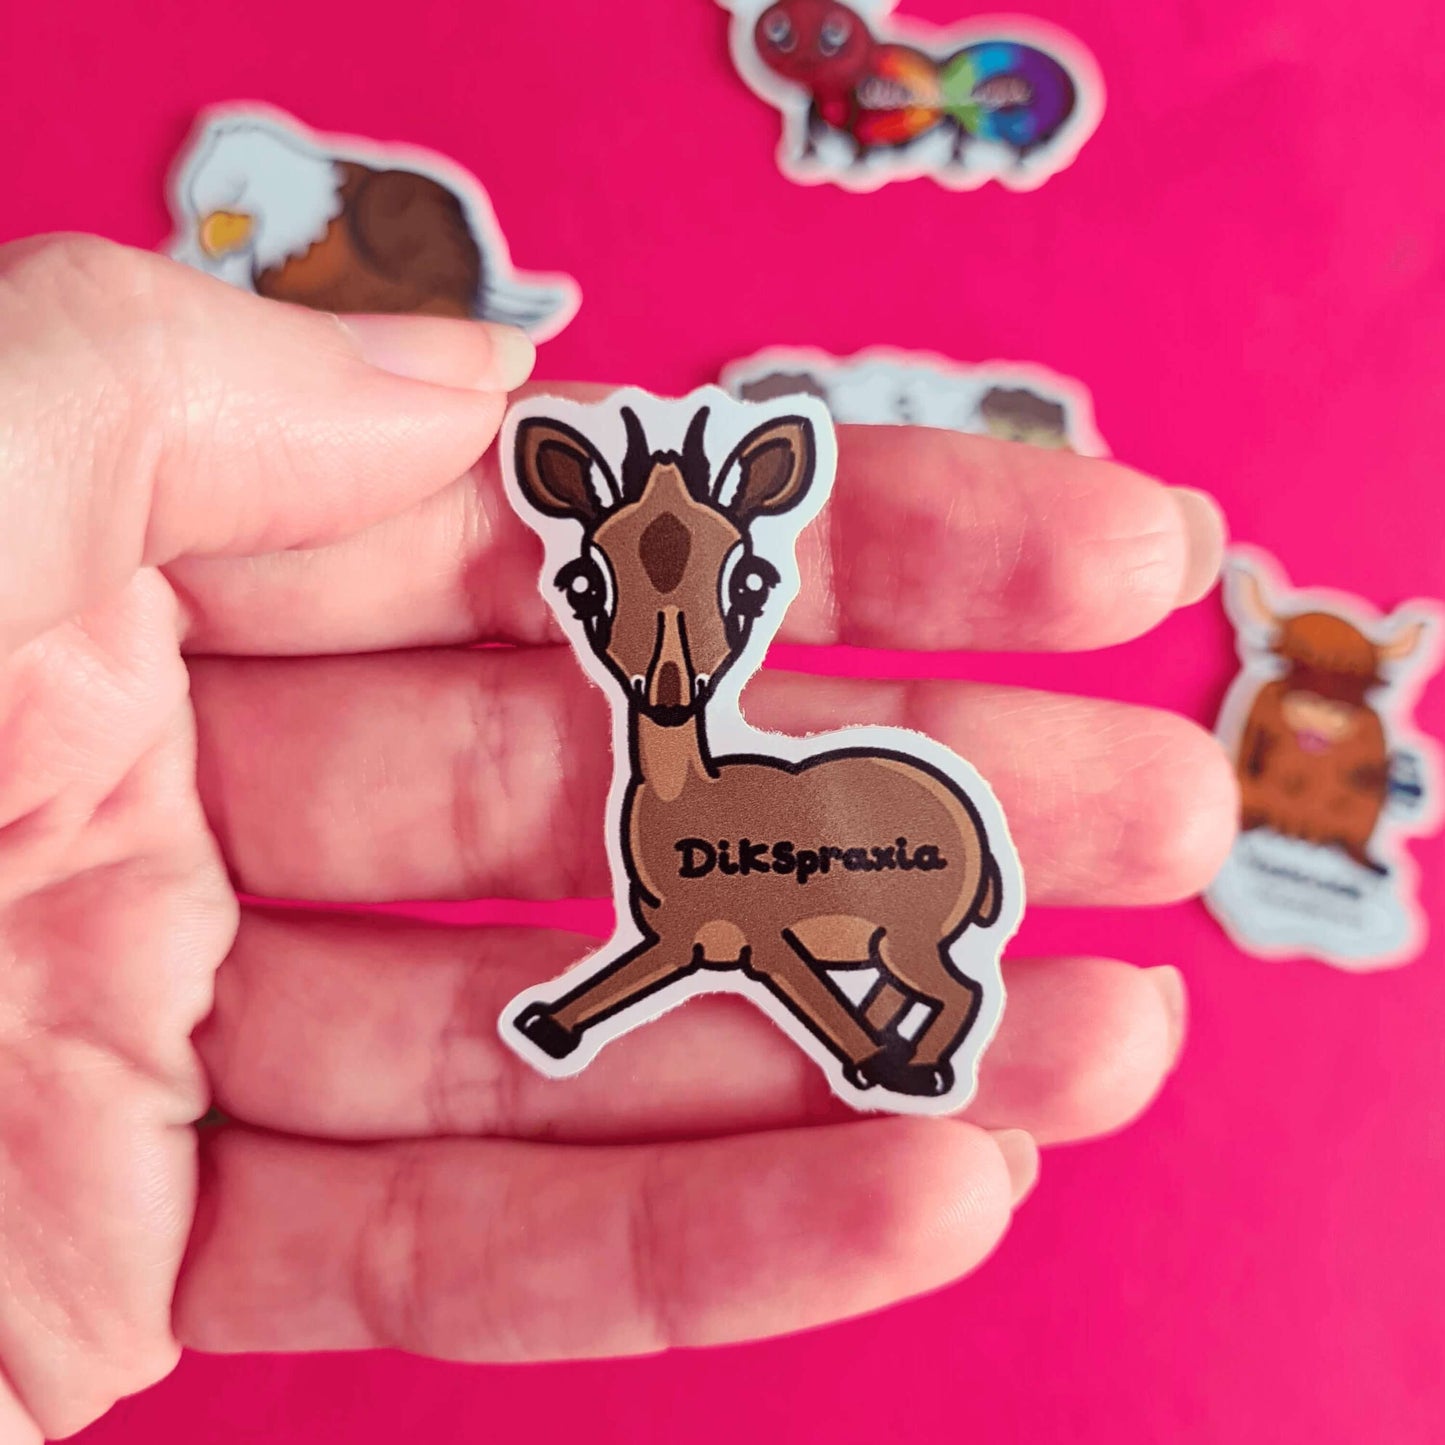 The Dikspraxia Sticker - Dyspraxia held over a red background with other innabox stickers. The brown dik dik antelope shaped sticker has its two front legs splayed chaotically with black text reading 'dikspraxia' across its middle. The design is raising awareness for dyspraxia and neurodivergence.